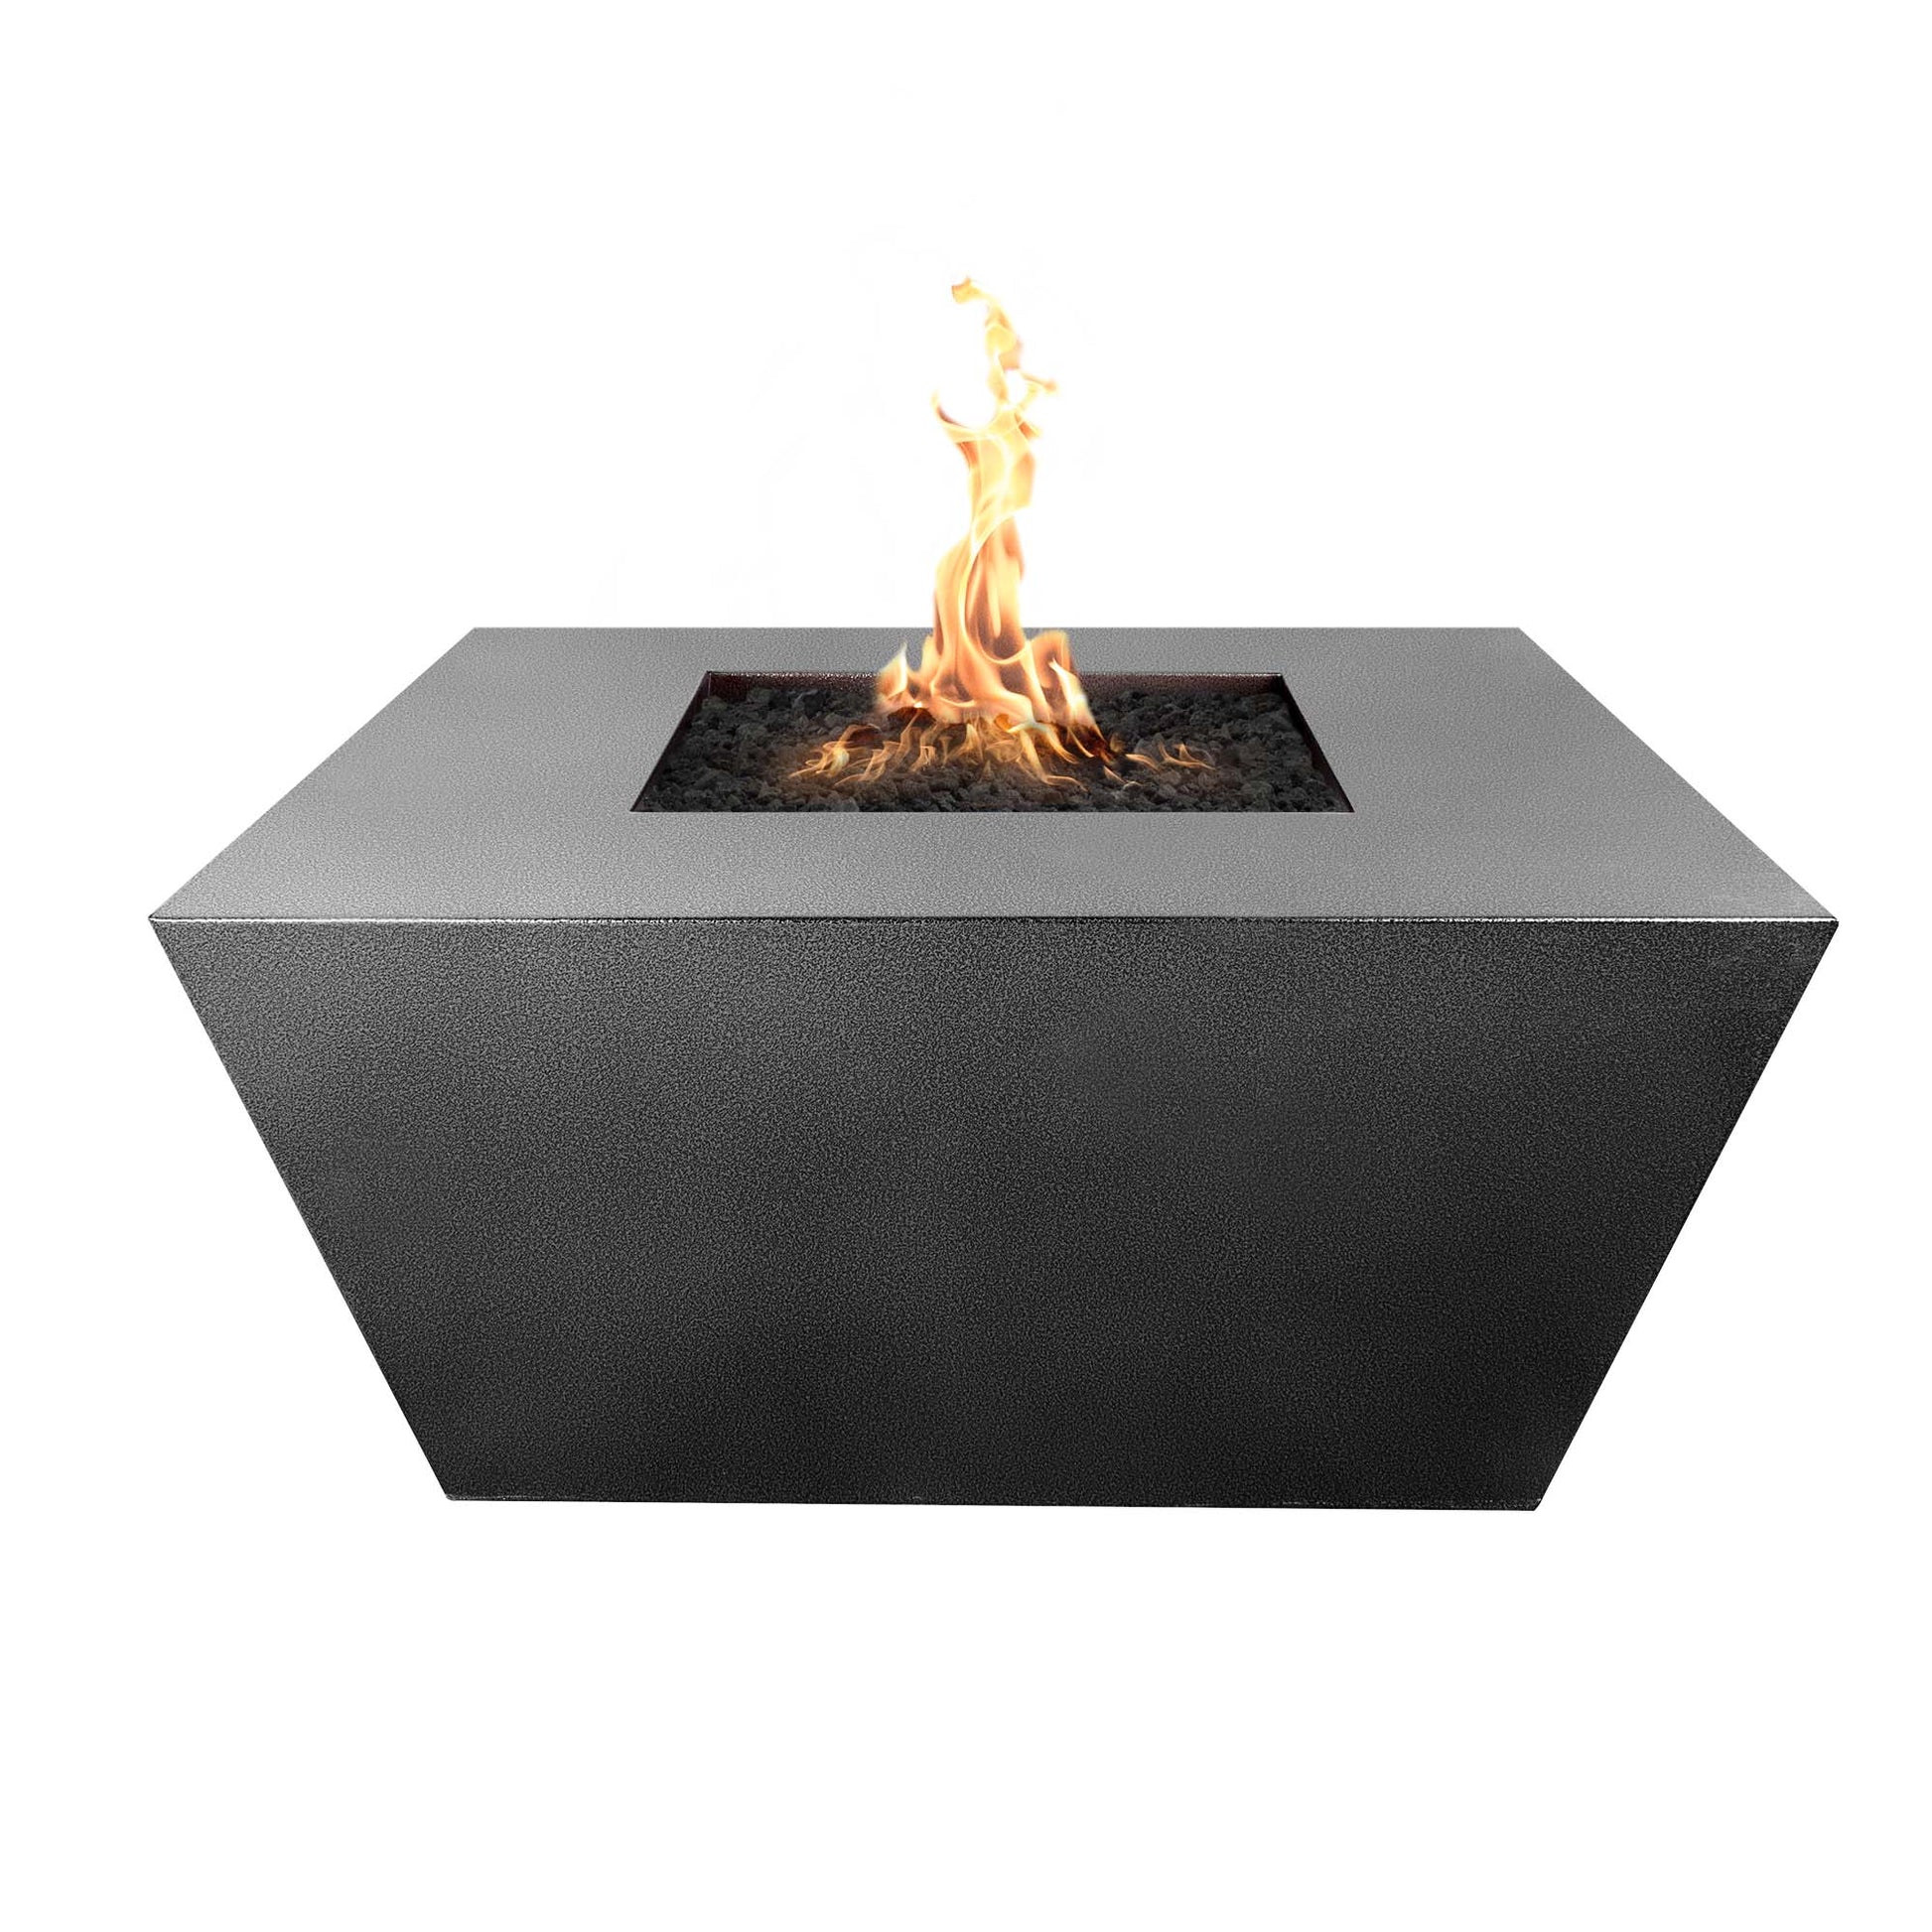 The Outdoor Plus Square Redan 36" Copper Vein Powder Coated Metal Liquid Propane Fire Pit with Match Lit with Flame Sense Ignition